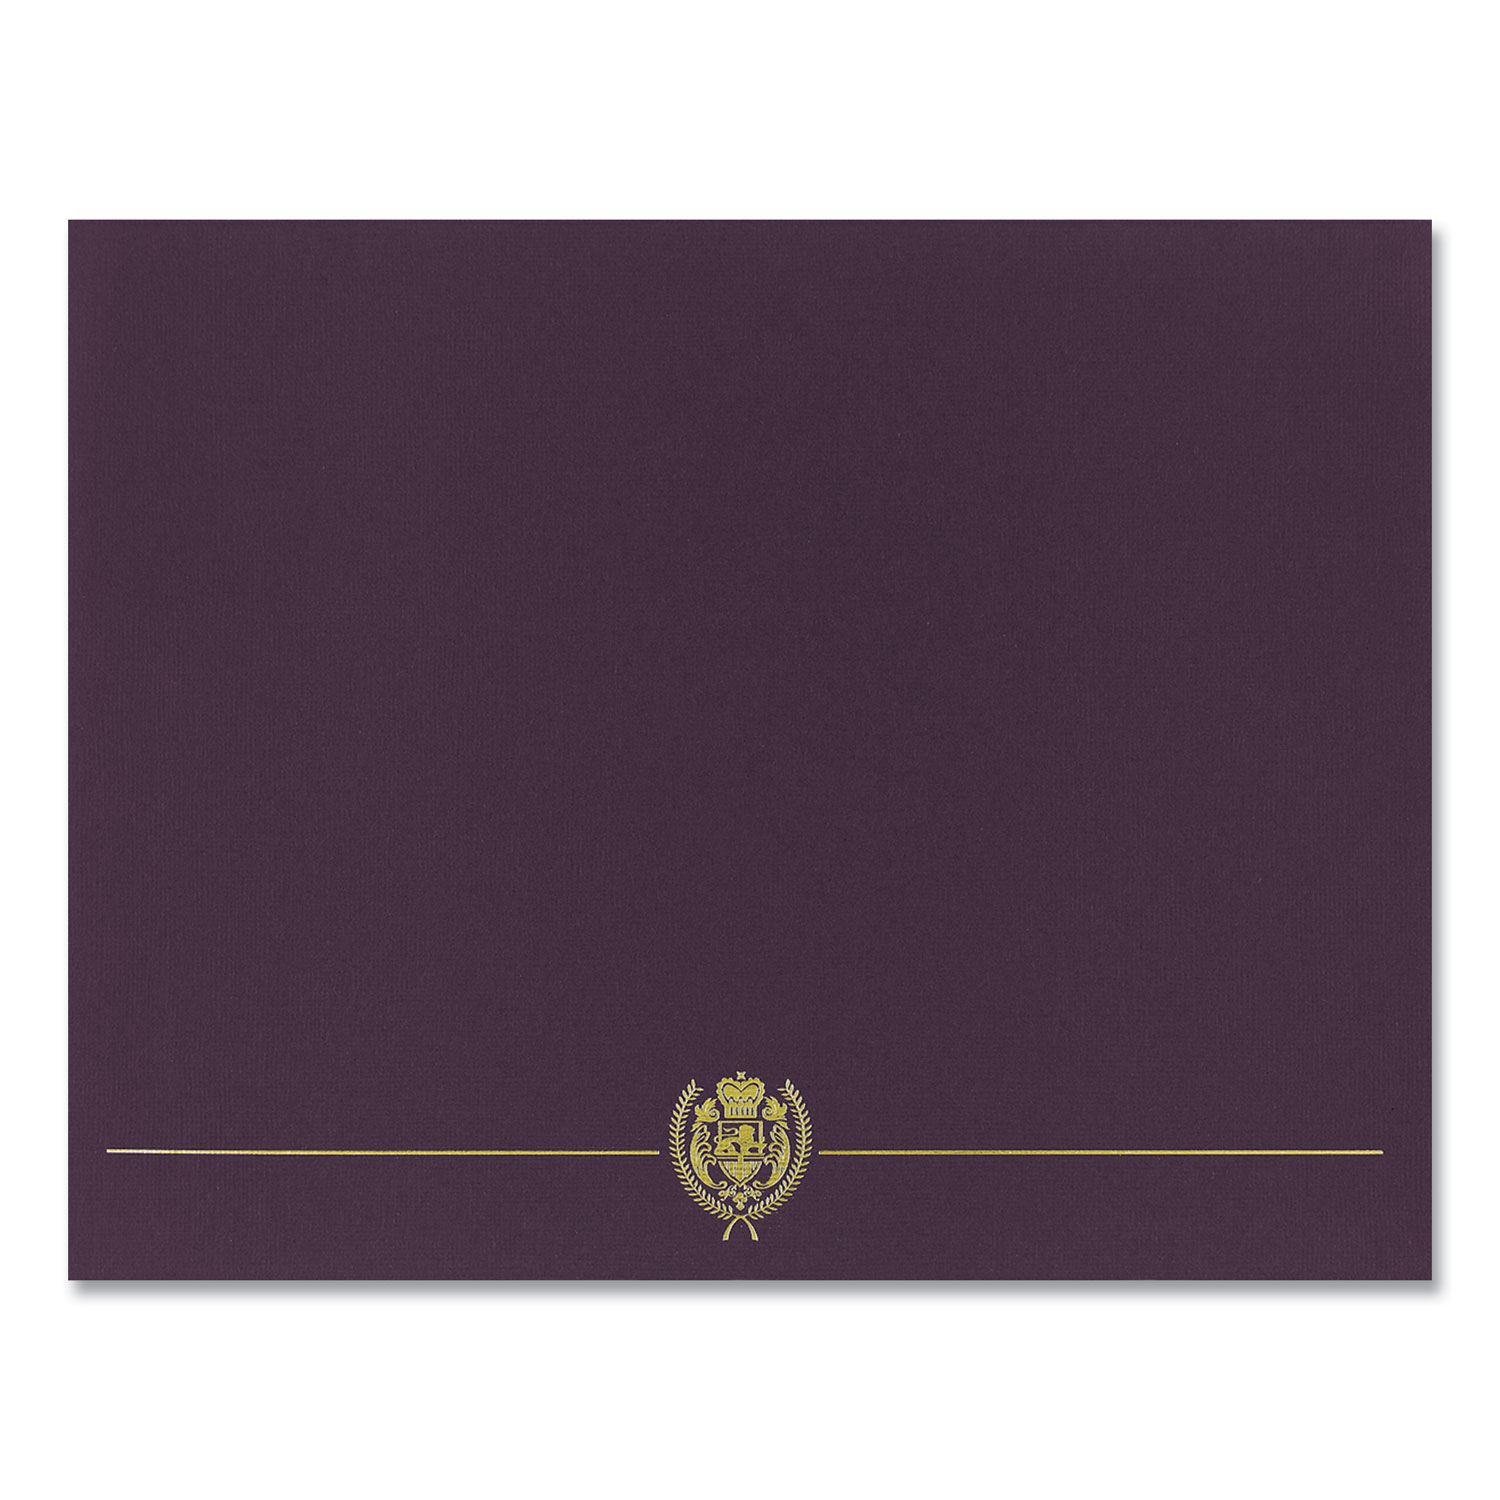  Great Papers! 903116 Classic Crest Certificate Covers, 9.38 x 12, Hunter, 5/Pack (GRP408779) 